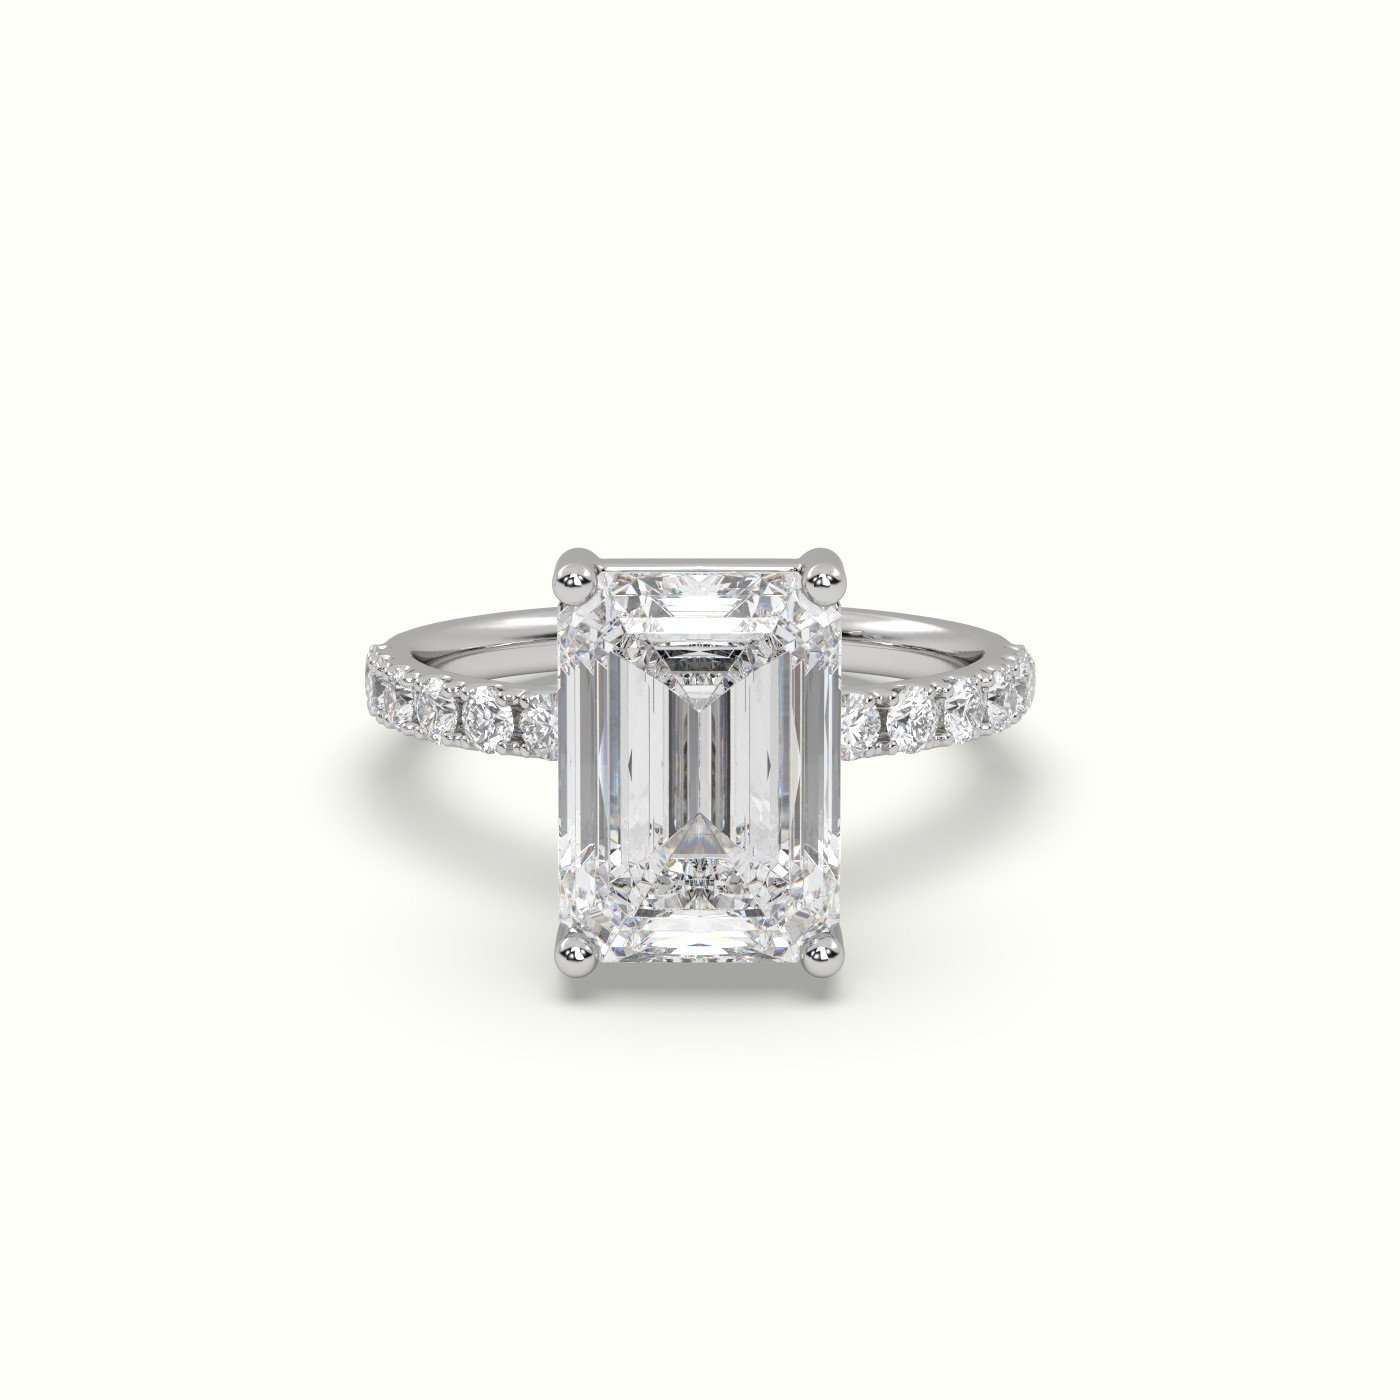 18K WHITE GOLD Emerald Cut Diamond 4 ROUND PRONGS Engagement Ring with Pave Band - Precious Jewels Antwerp Elegance